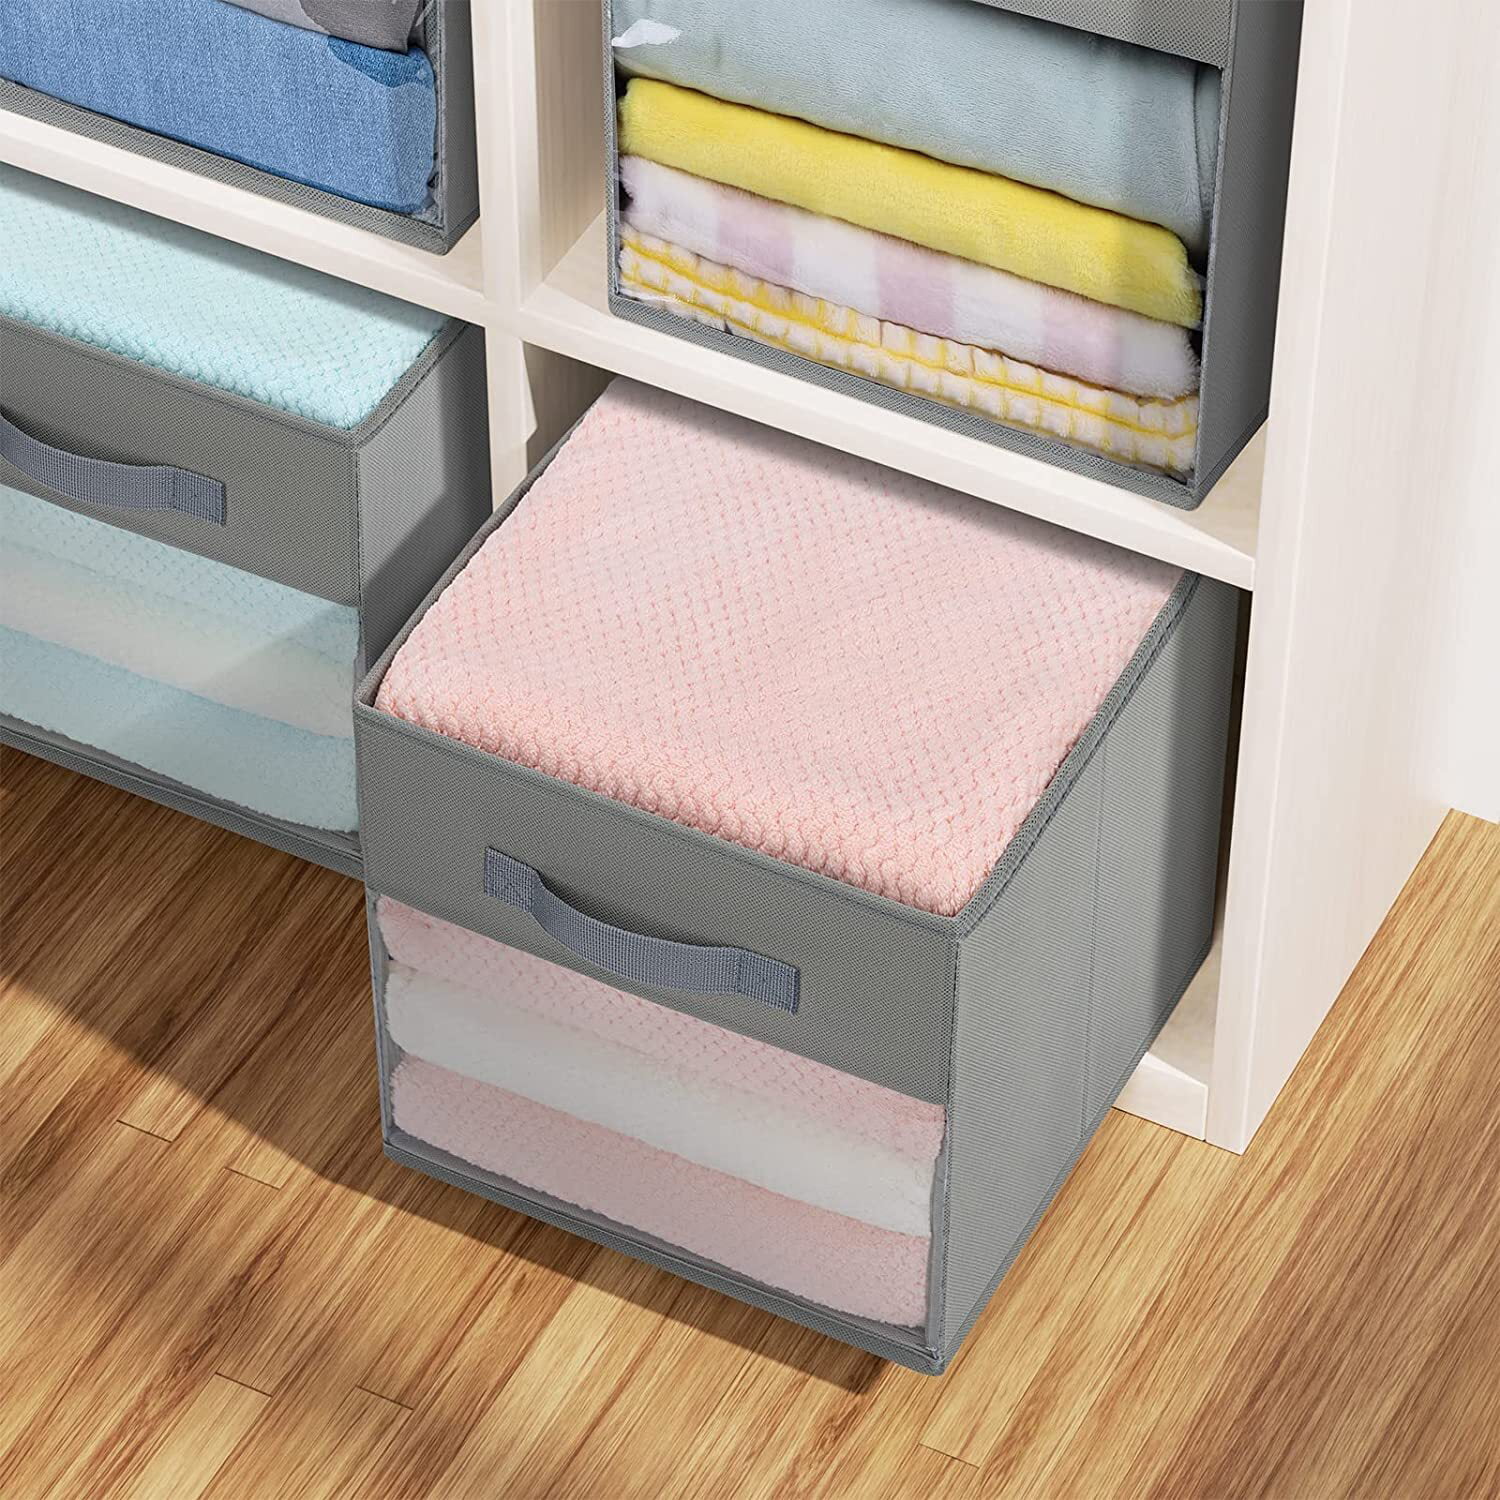  Thyle 6 Pieces Cubes Storage Bins for Kids with Clear Window  and Handles Foldable Fabric Cubical Storage Organizer Collapsible Baskets  for Closet Organization Box for Nursery Shelves Clothes Toys : Home